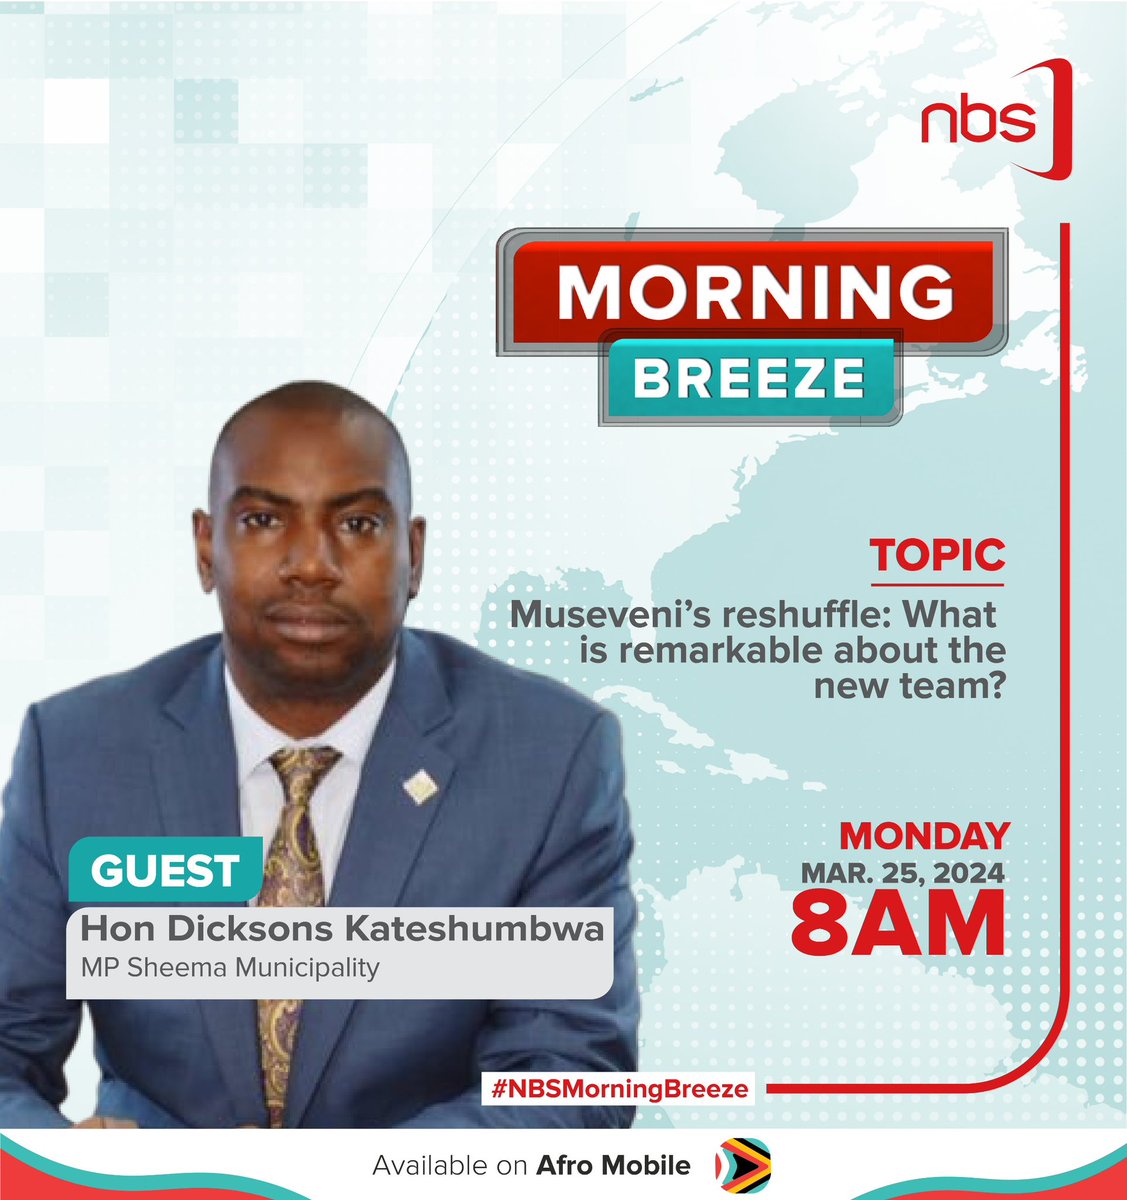 Museveni's Reshuffle: What is remarkable about the new team? Hon @Kateshd and Imam Kasozi will join us tomorrow for the Topical Discussion to discuss this and more, starting at 8 AM. Don't miss the show! #NBSUpdates #NBSMorningBreeze